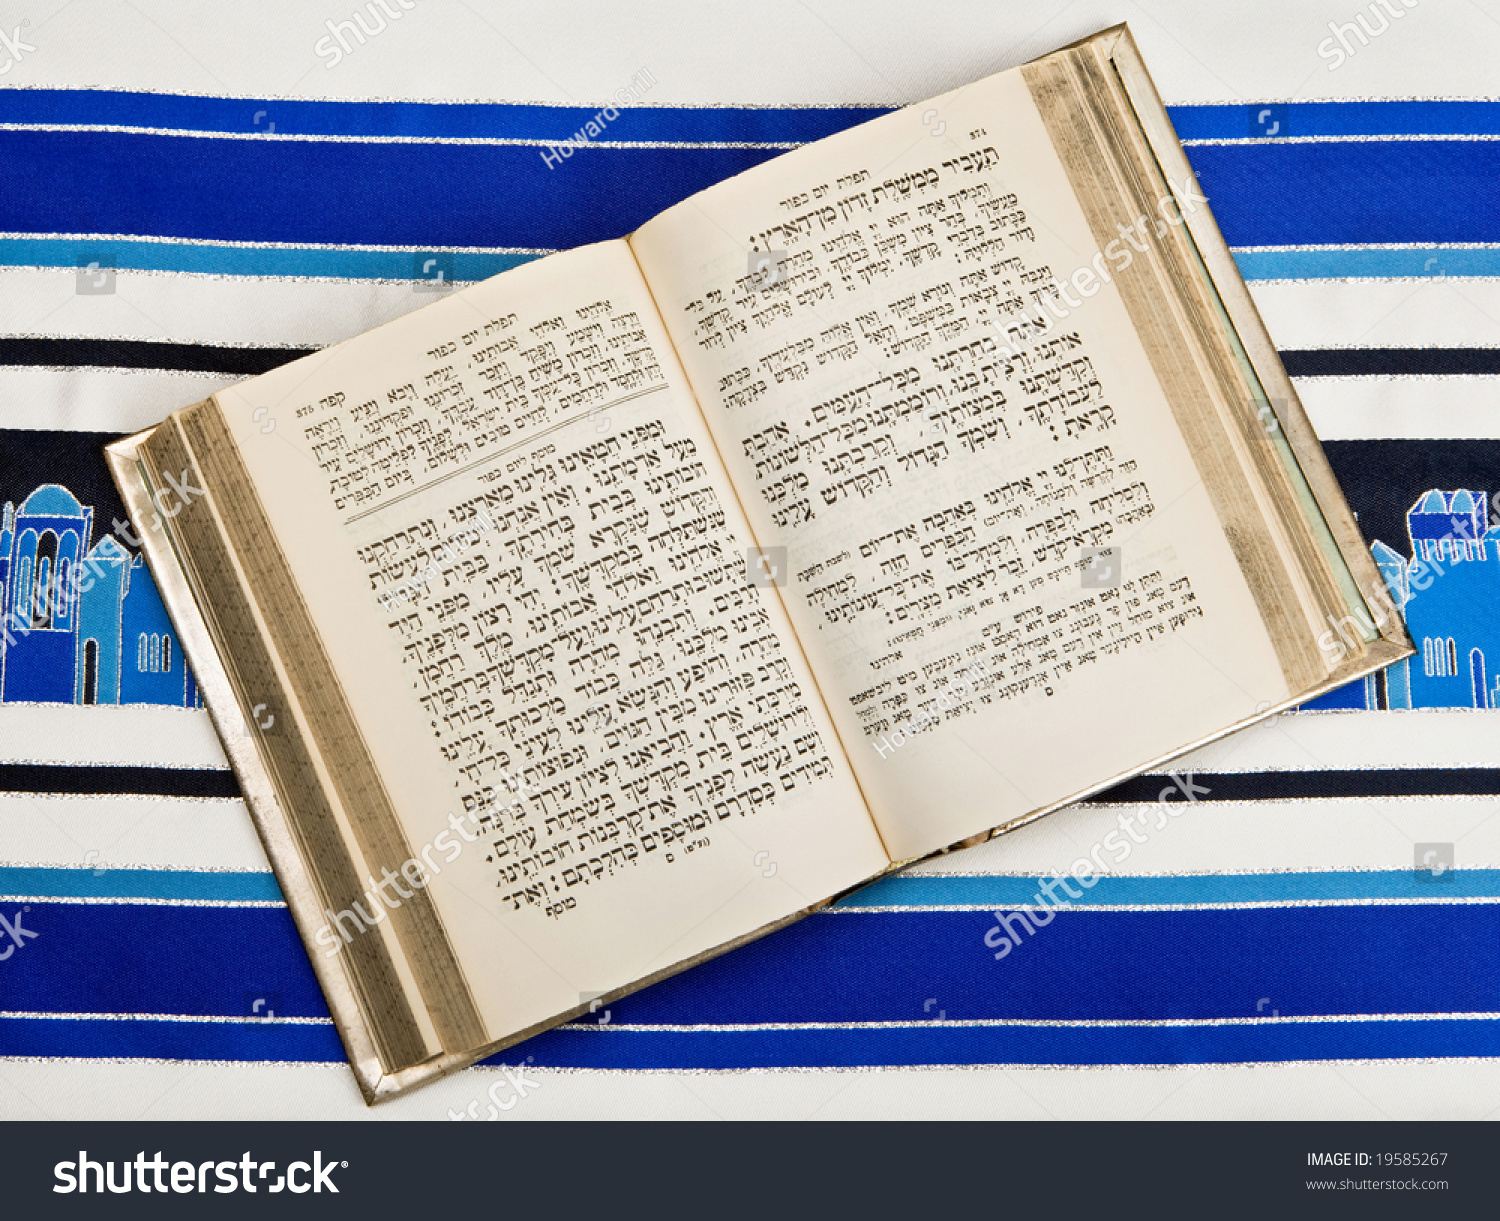 A Jewish prayer book, or Siddur, open and on top of a Jewish prayer shawl or Tallit. #19585267